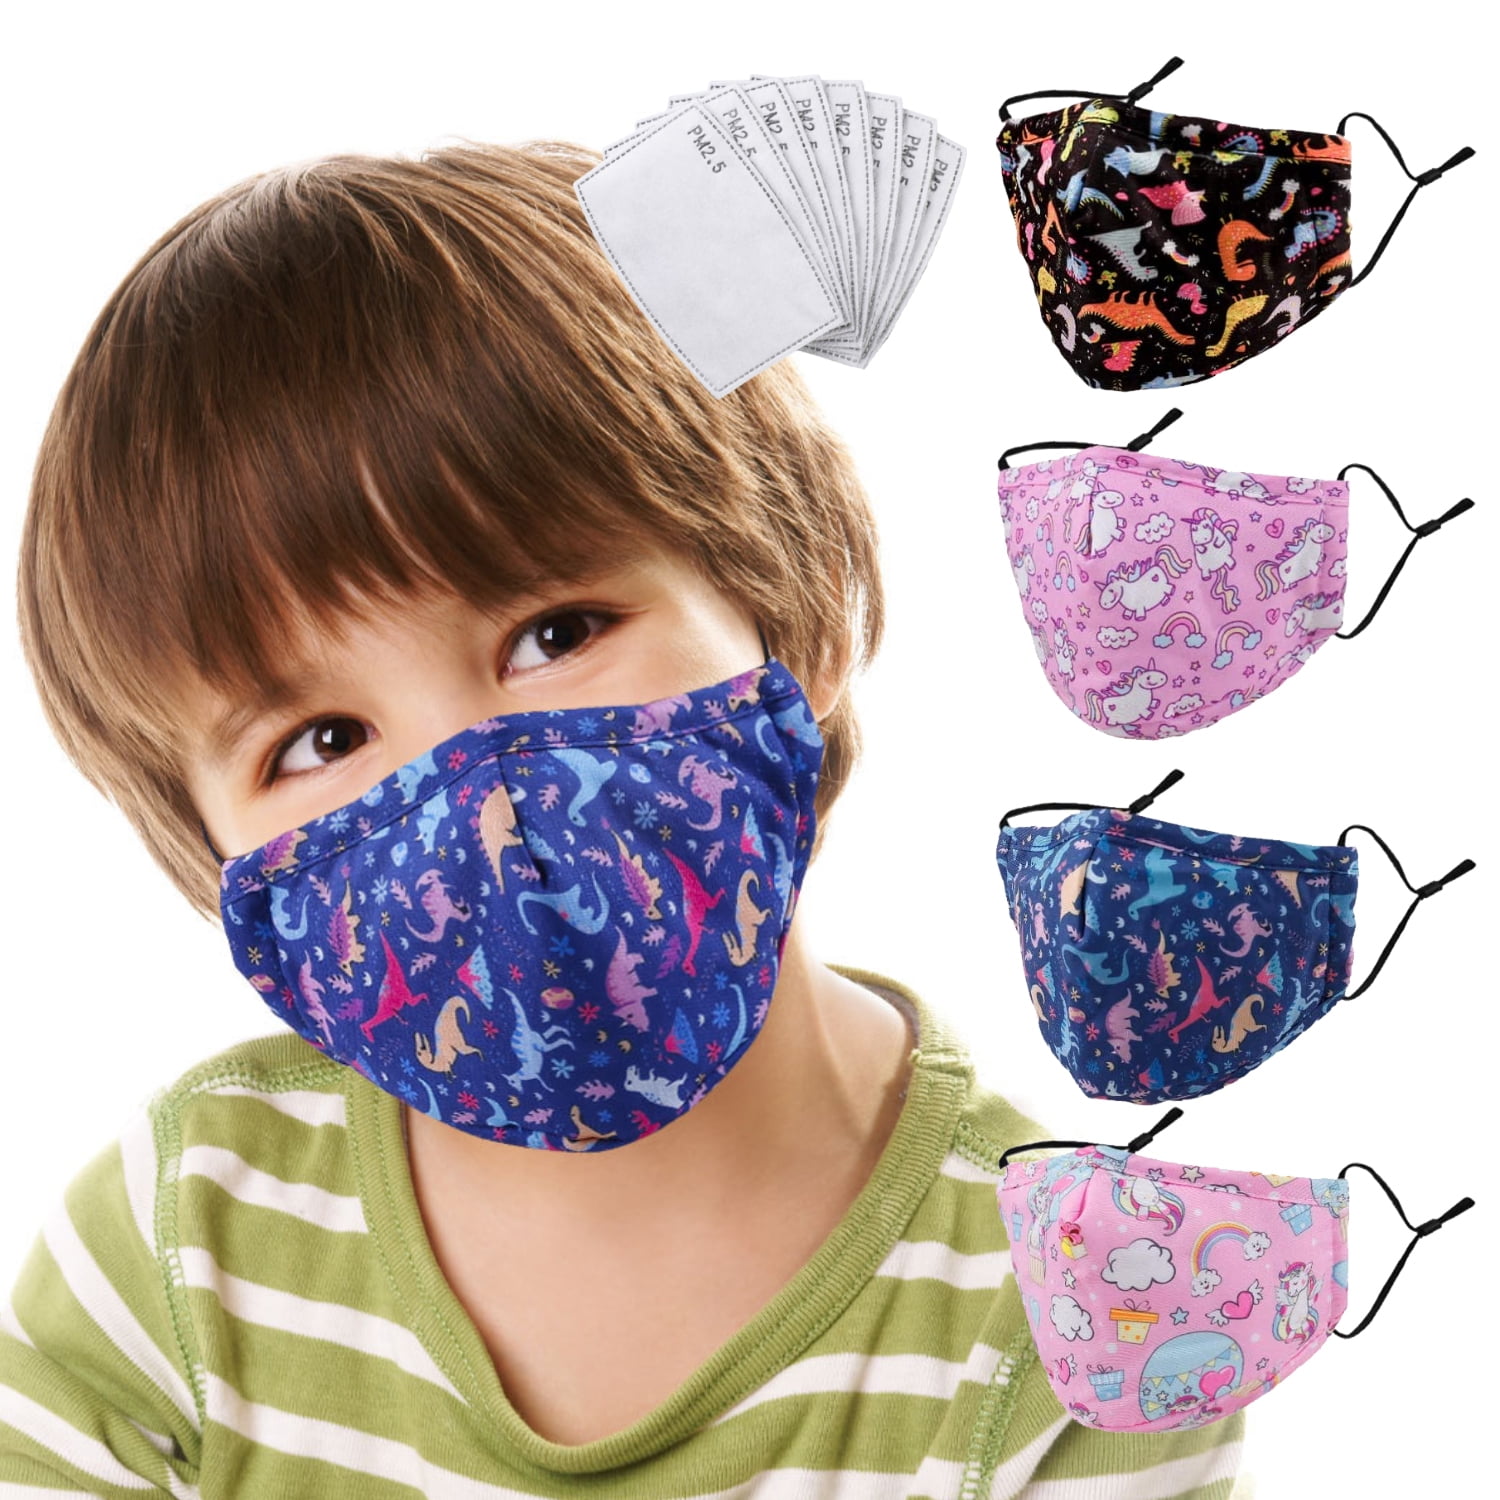 Reusable Cloth Face Bandanas Covering Set for Boys Girls Teens Age 5-13 Kids Face Bandana 3-Pack with Cute Pattern Printed 